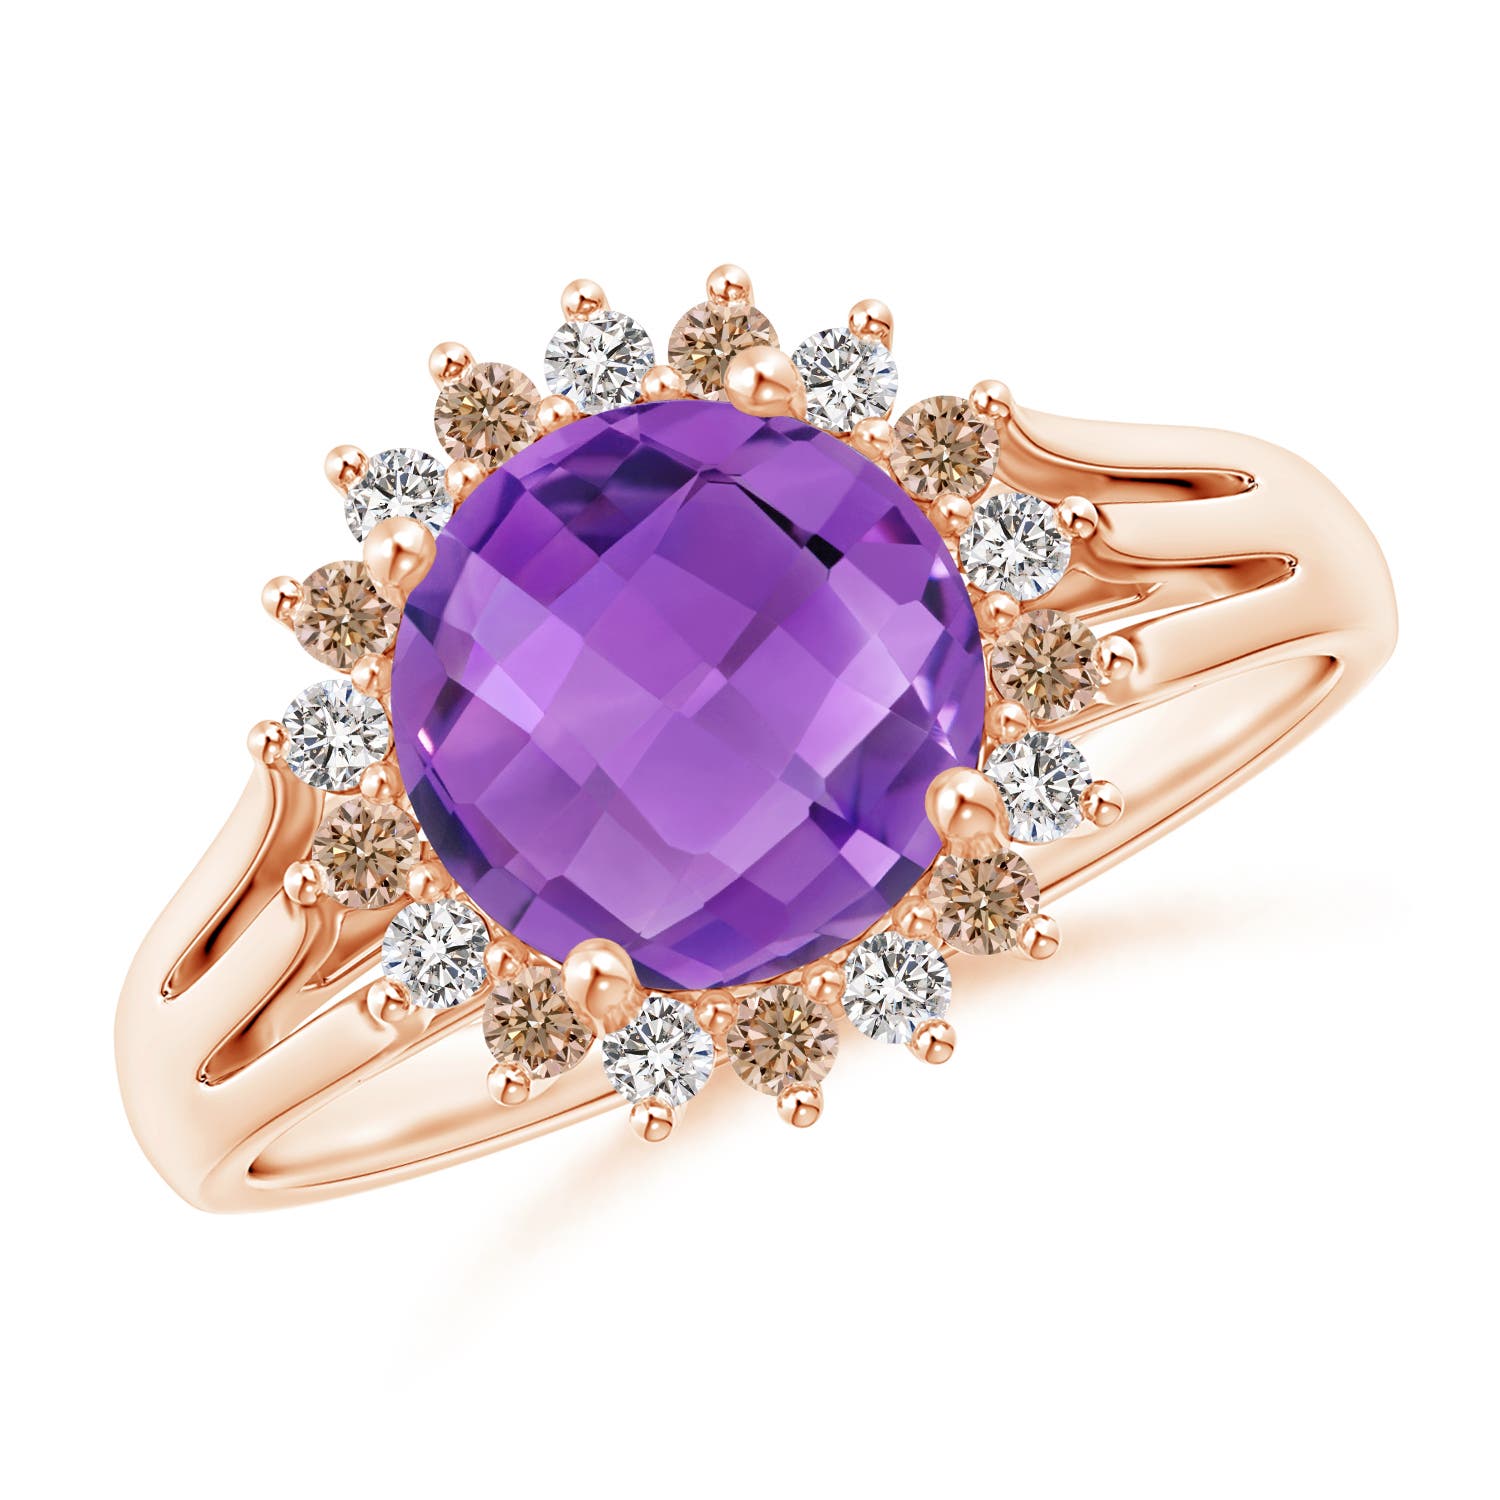 AA - Amethyst / 2.1 CT / 14 KT Rose Gold